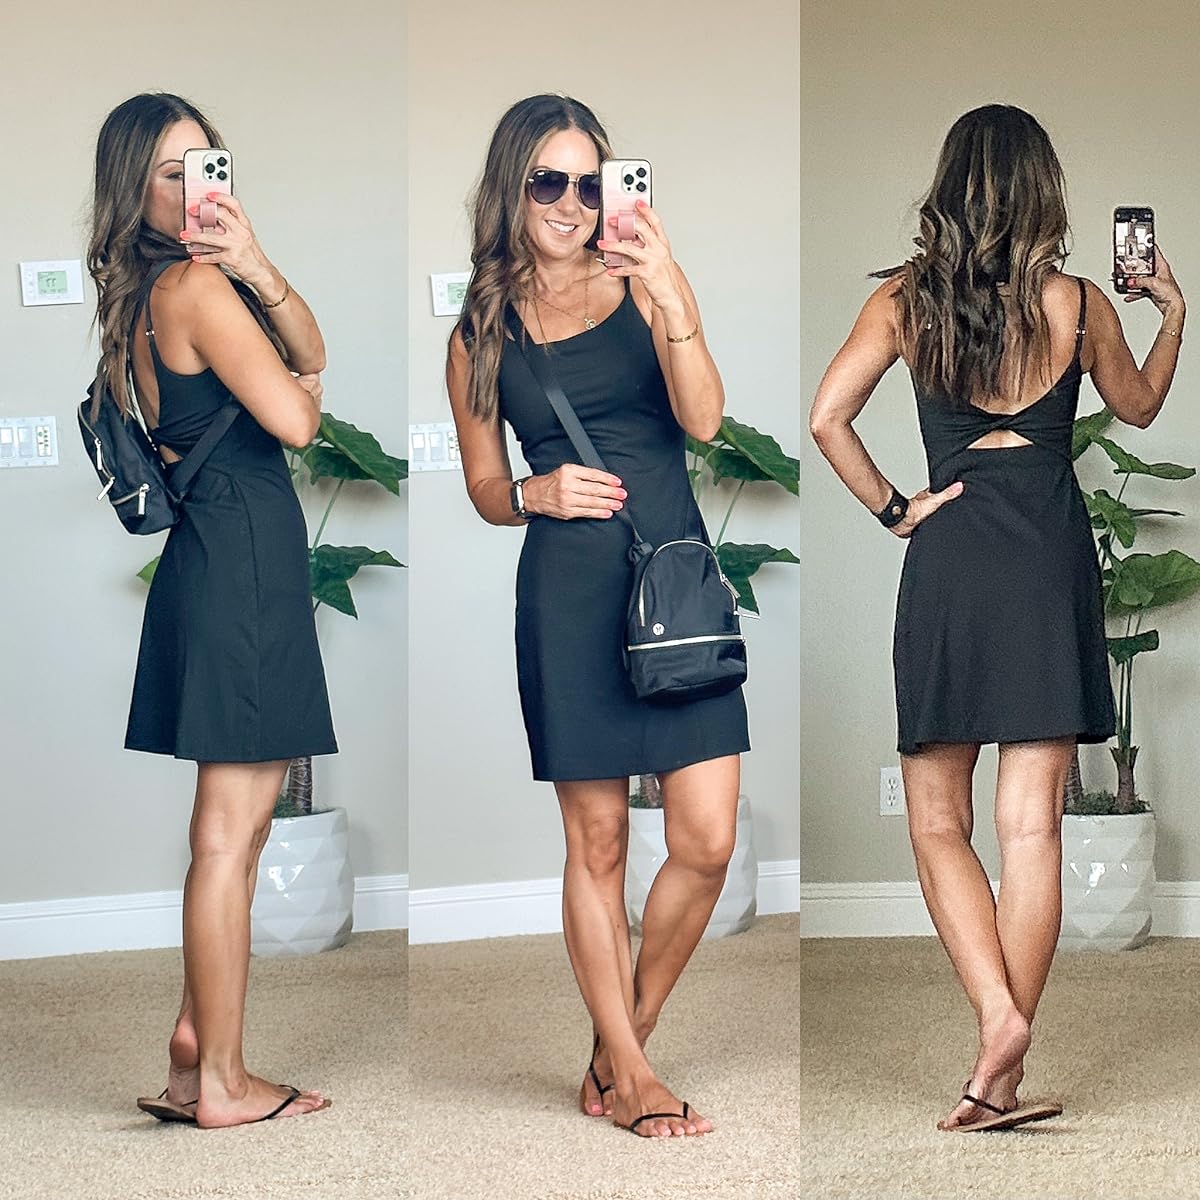 top 23 fashion favorites of 2023 | top 23 of 2023, fashion, fashion favorites, fashion finds, outfit inspo, tennis dress, backpack, lululemon, sunglasses, sandals, summer outfit